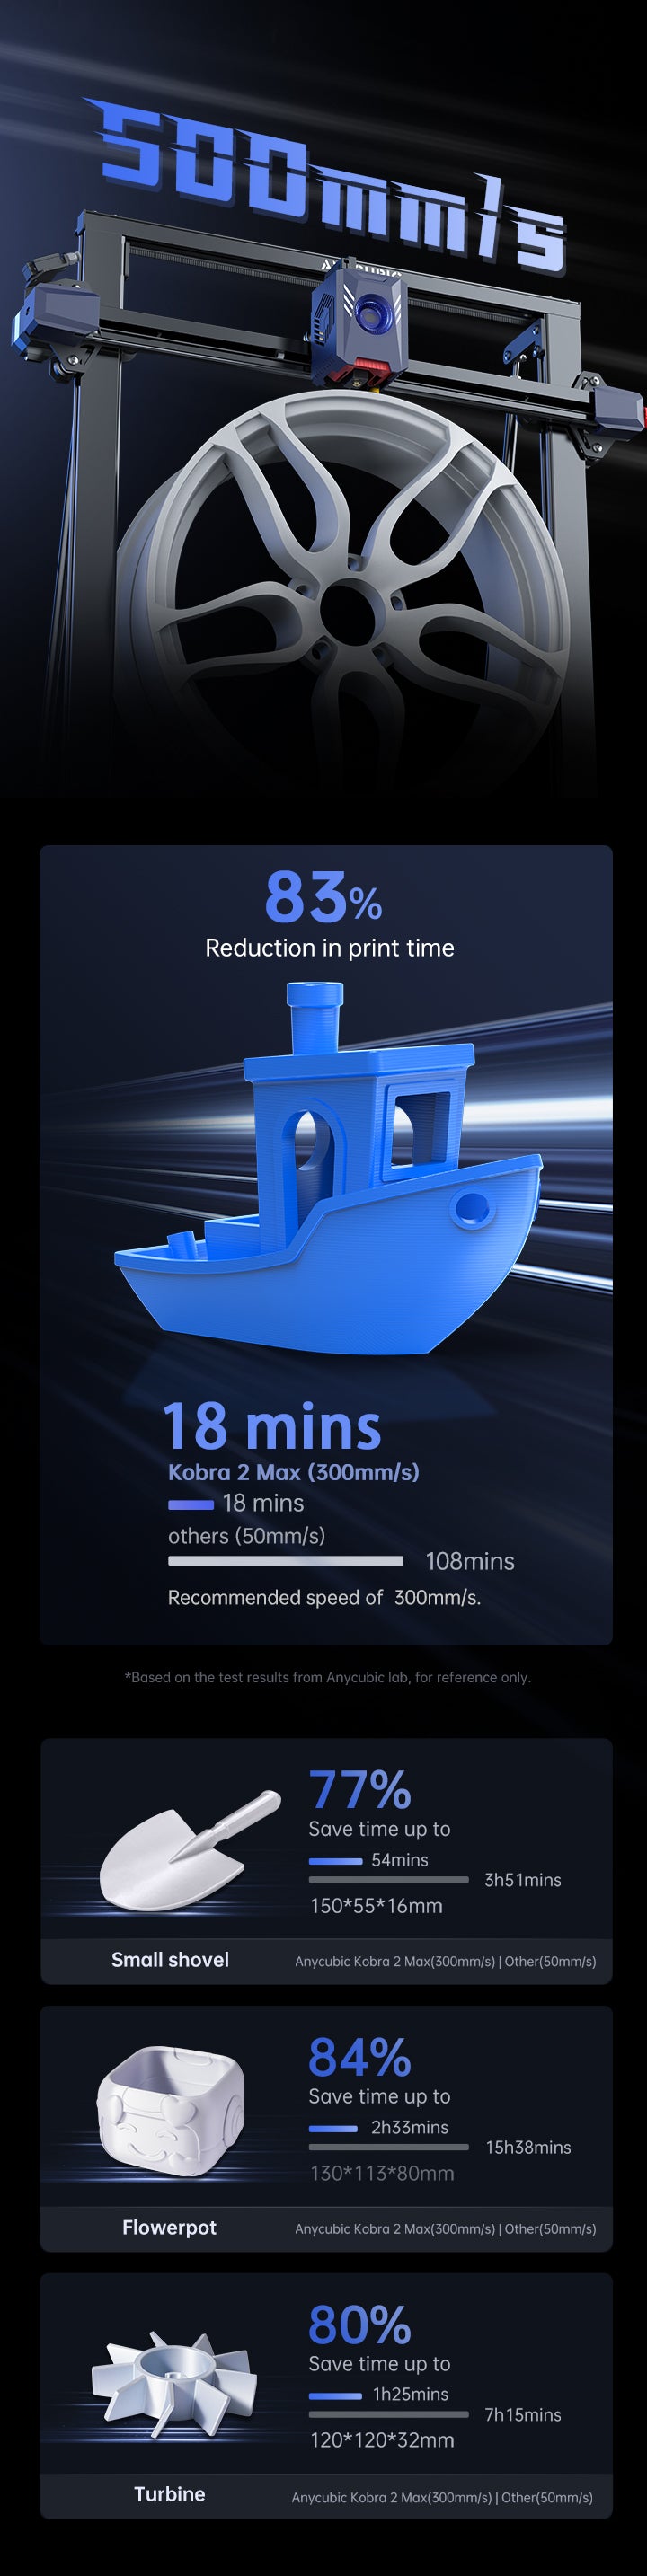 Anycubic Kobra 2 Max - 10 times faster